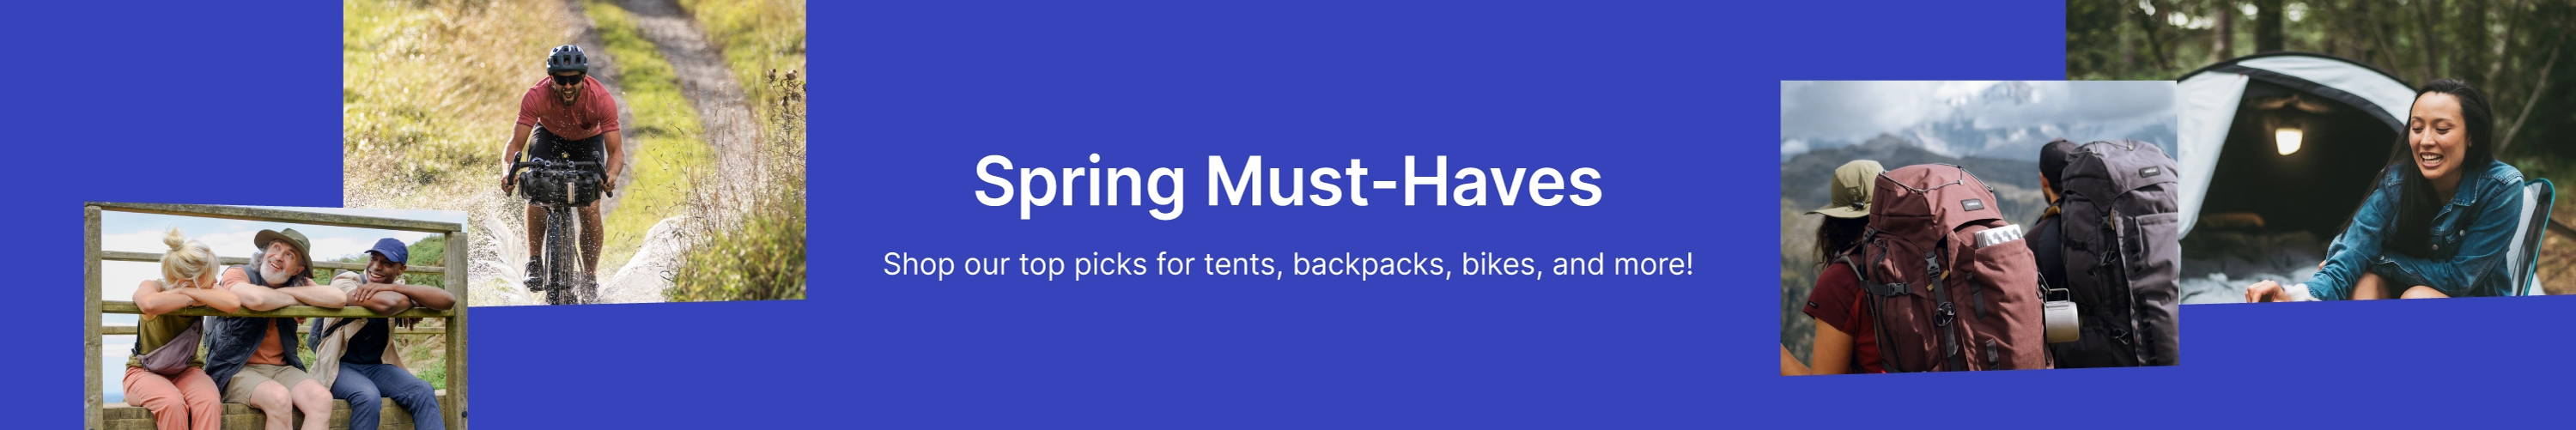 Spring Must-Haves: Shop our top picks for tents, backpacks, bikes, and more!